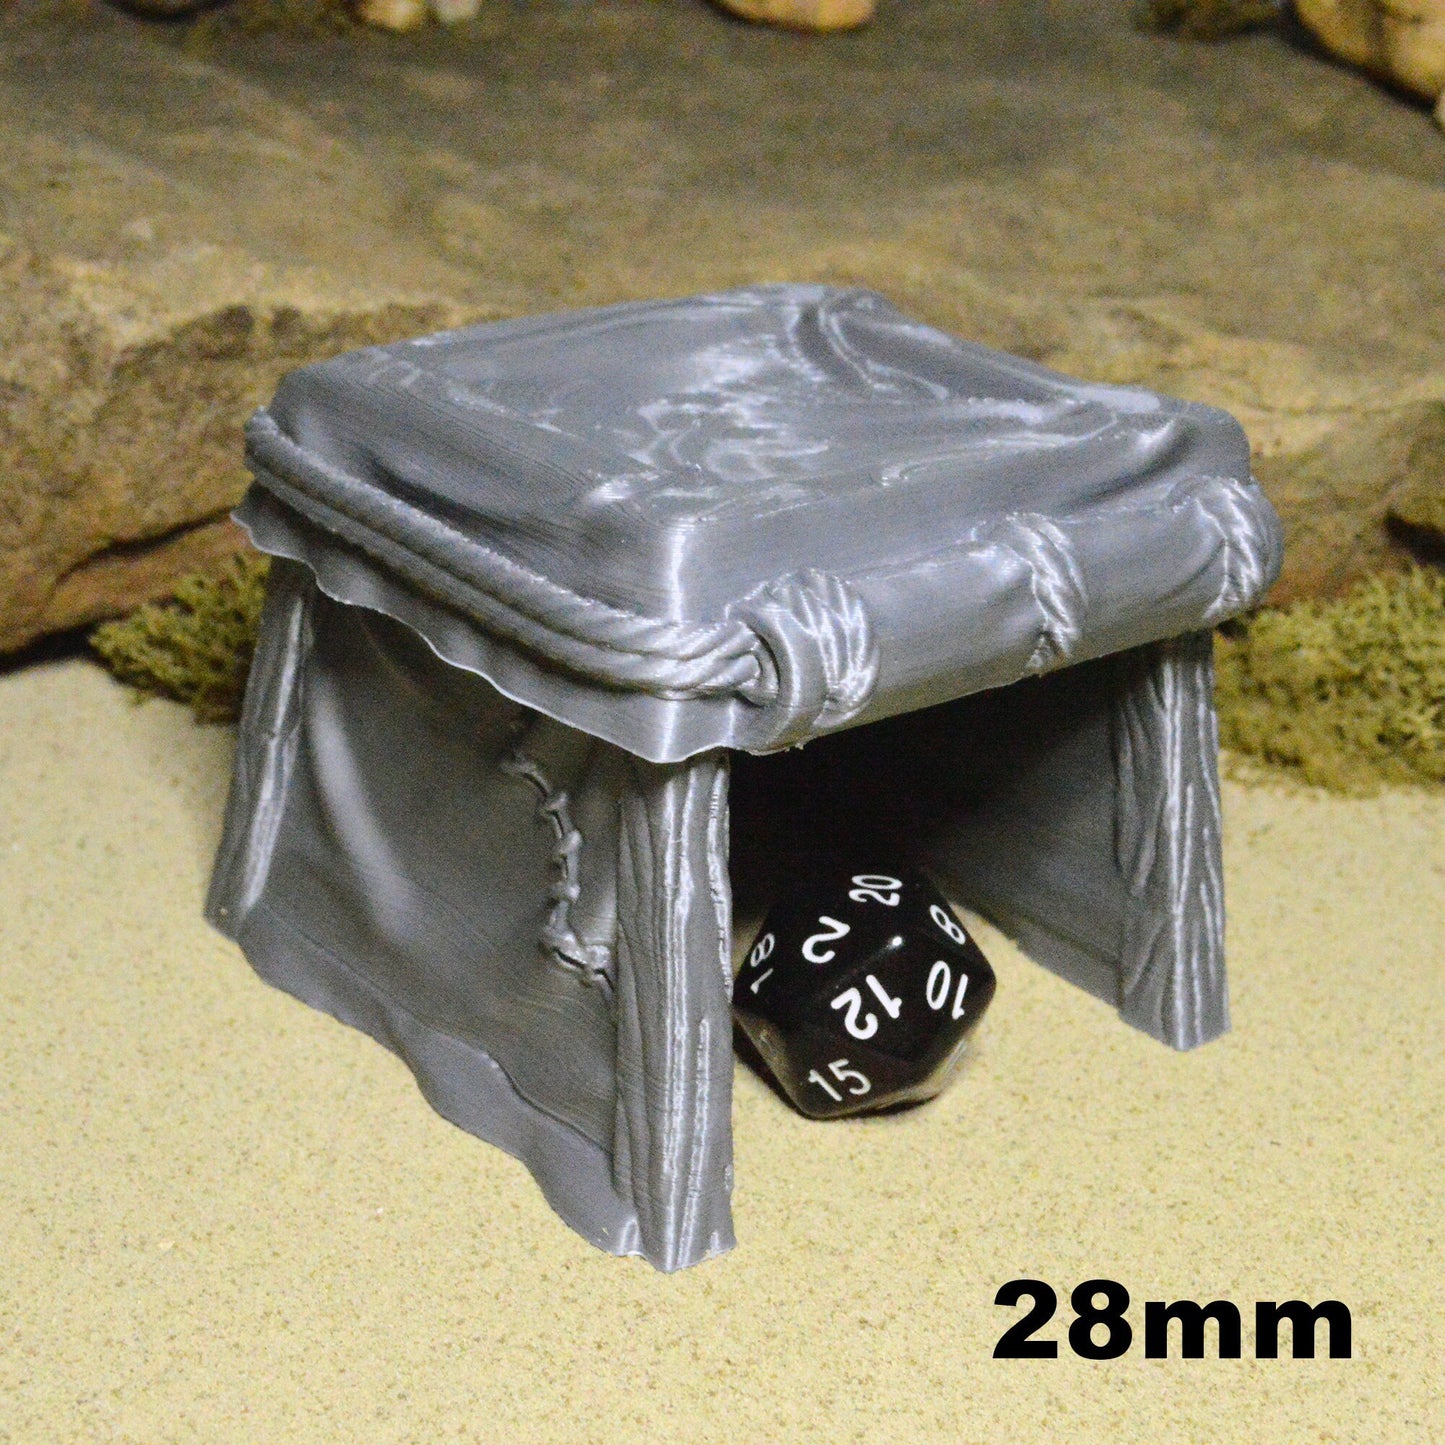 Miniature Tents 28mm 32mm for D&D Camp Terrain, DnD Pathfinder Small Market Vendor Tents, Desert Diorama Terrain, Gift for Tabletop Gamers